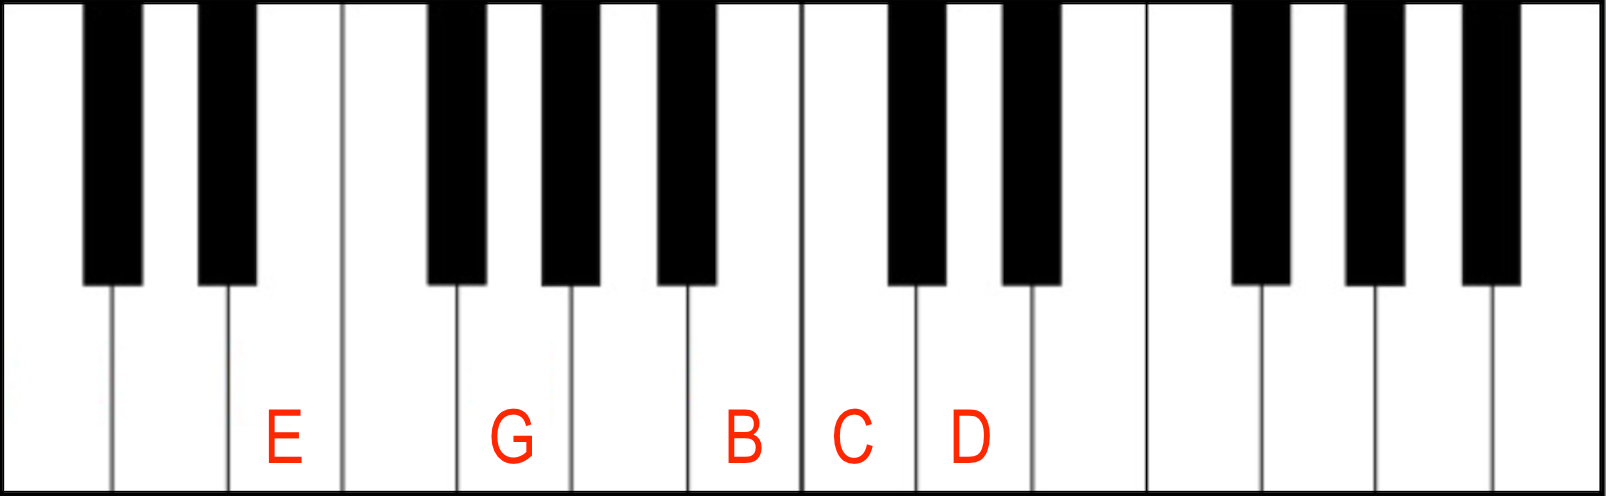 Jazz Piano Chords:: Major 9th Jazz Piano Chord in first inversion